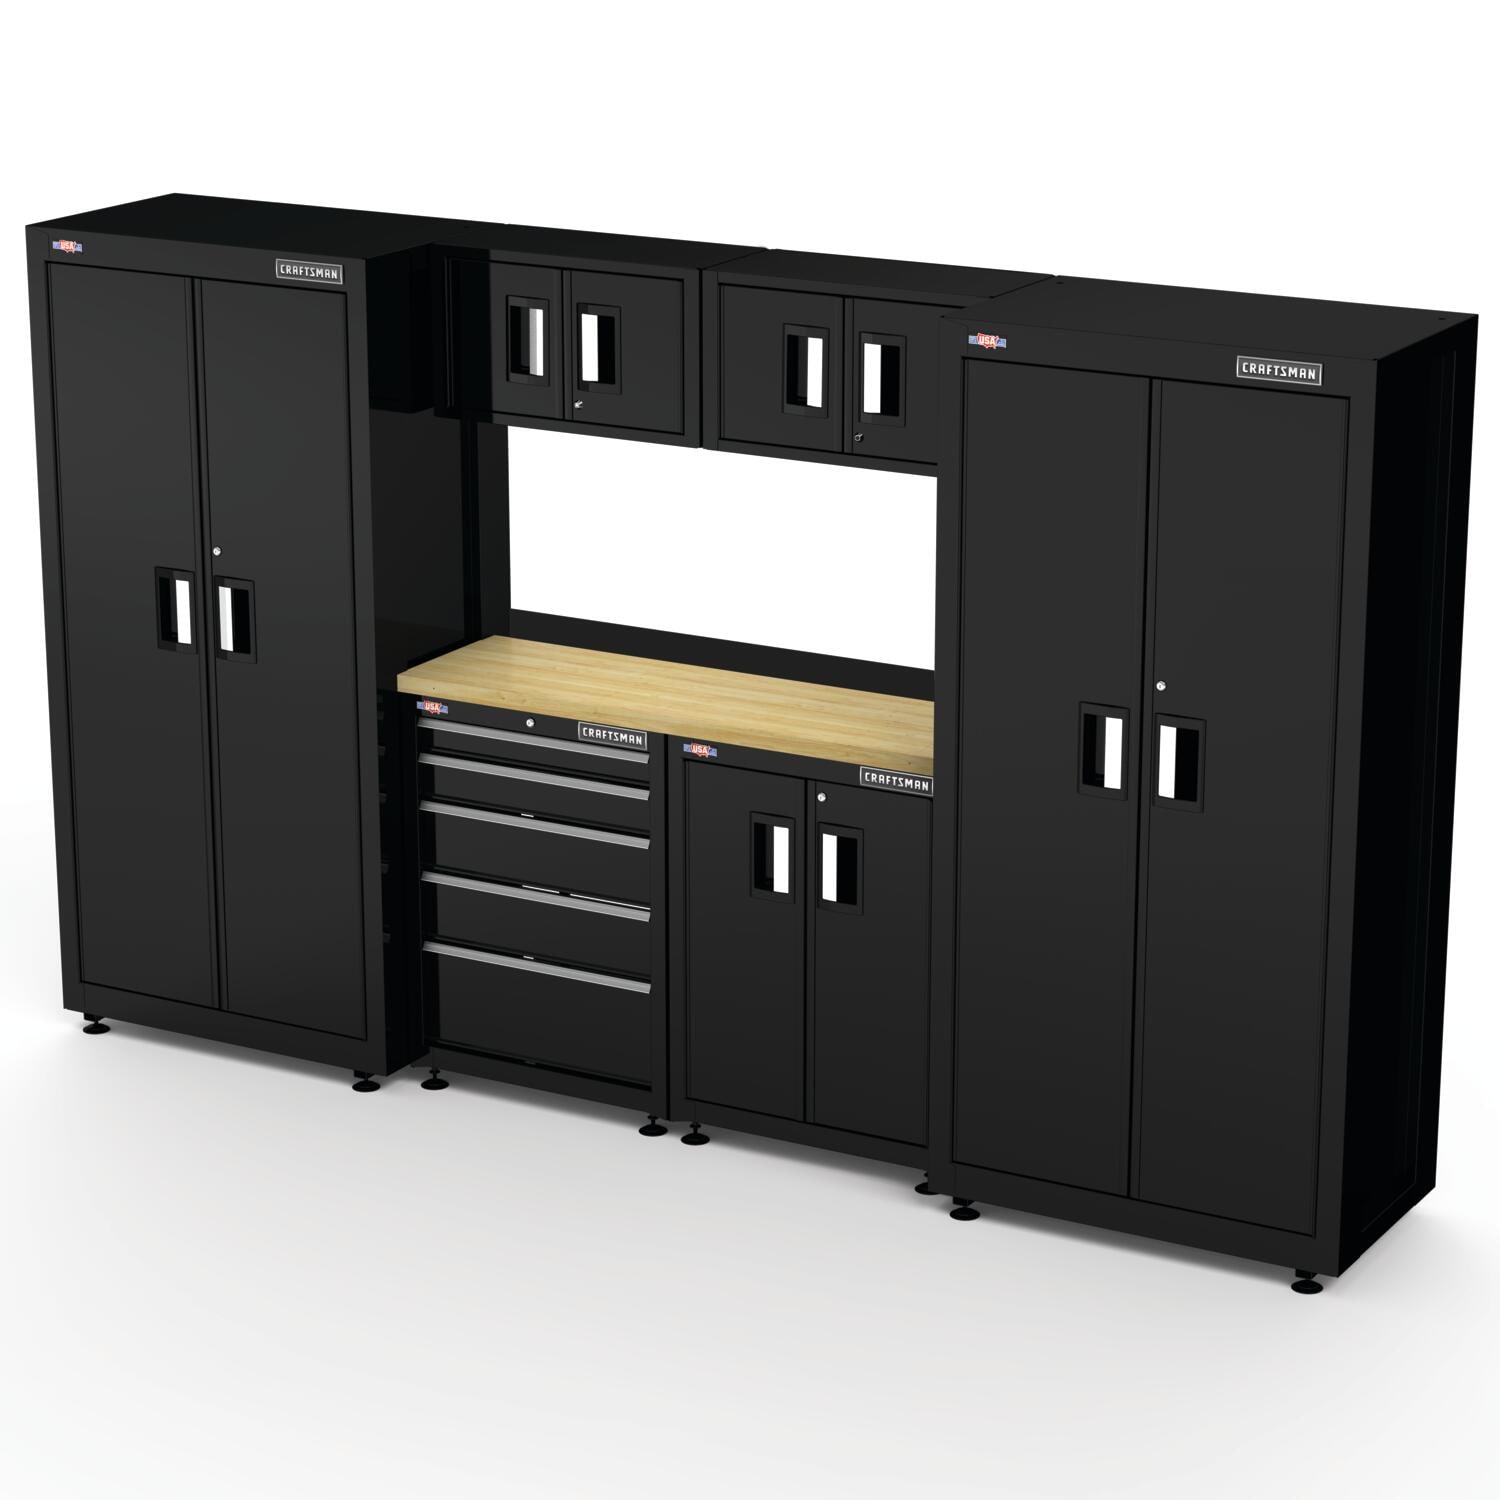 Craftsman 6 Cabinets Steel Garage Storage System In Black Smooth 125 7 W X 74 H The Systems Department At Lowes Com